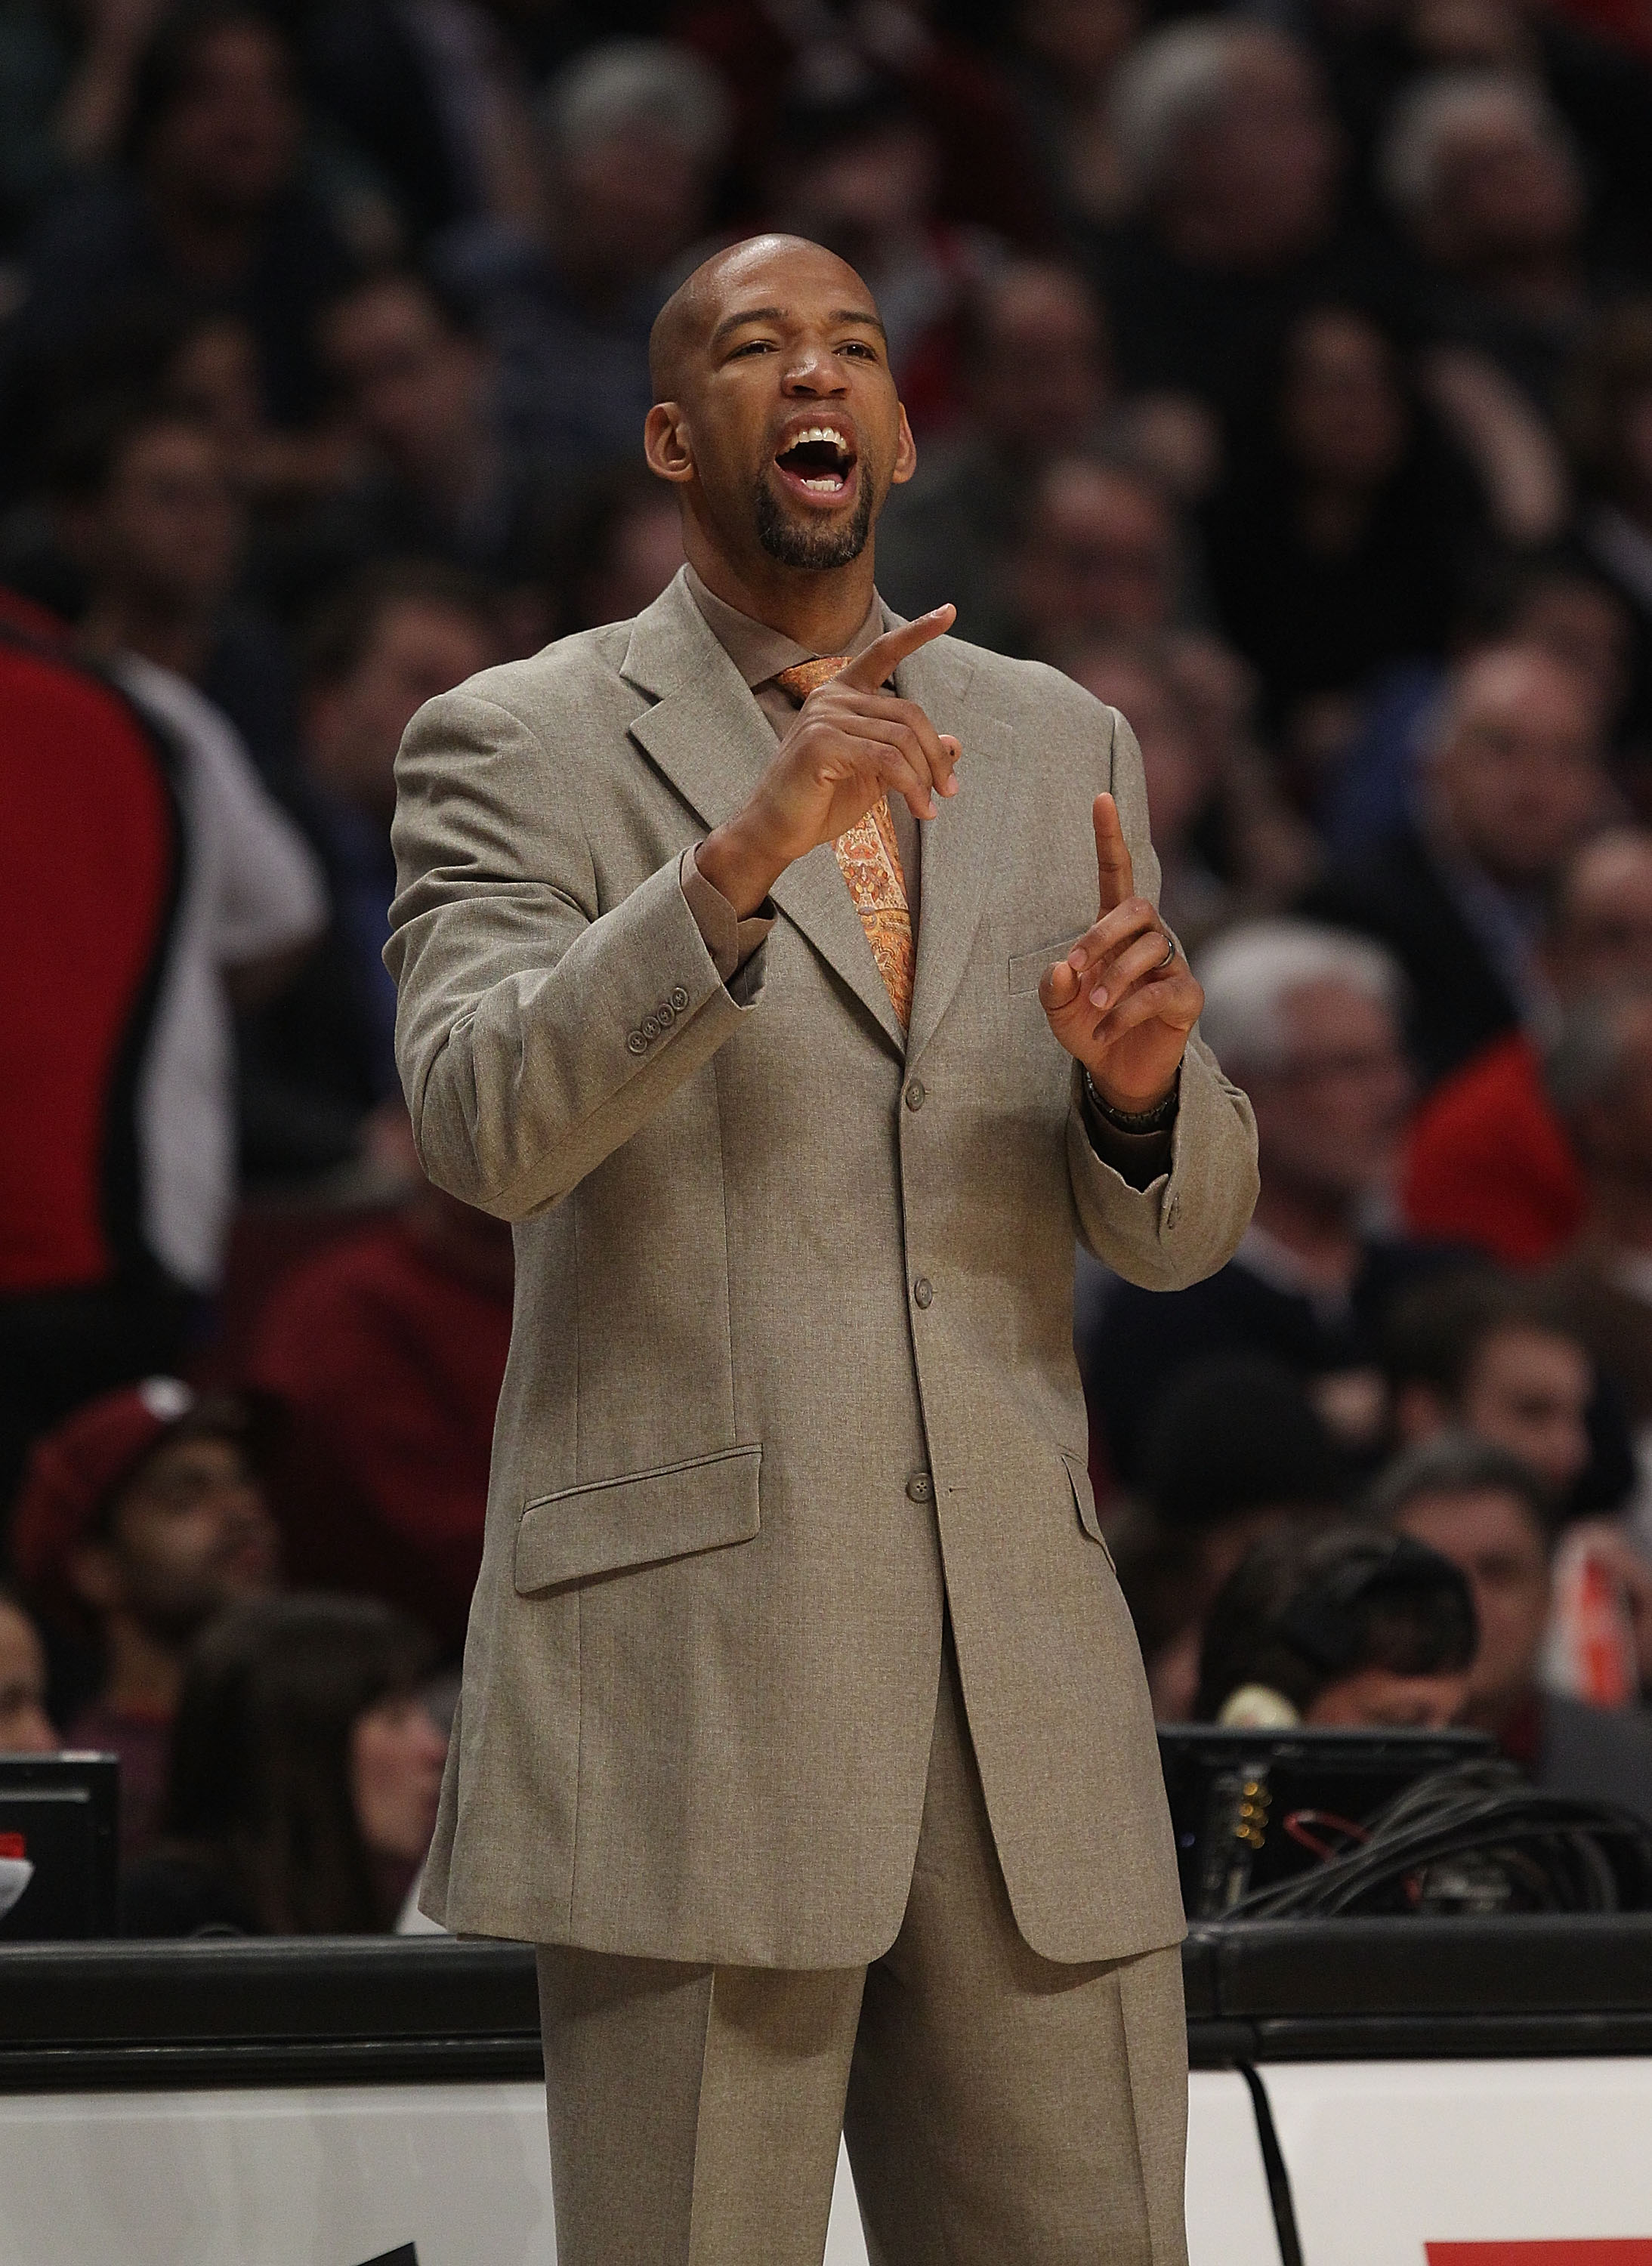 Many people thought Monty Williams would win Coach of the Year this season.